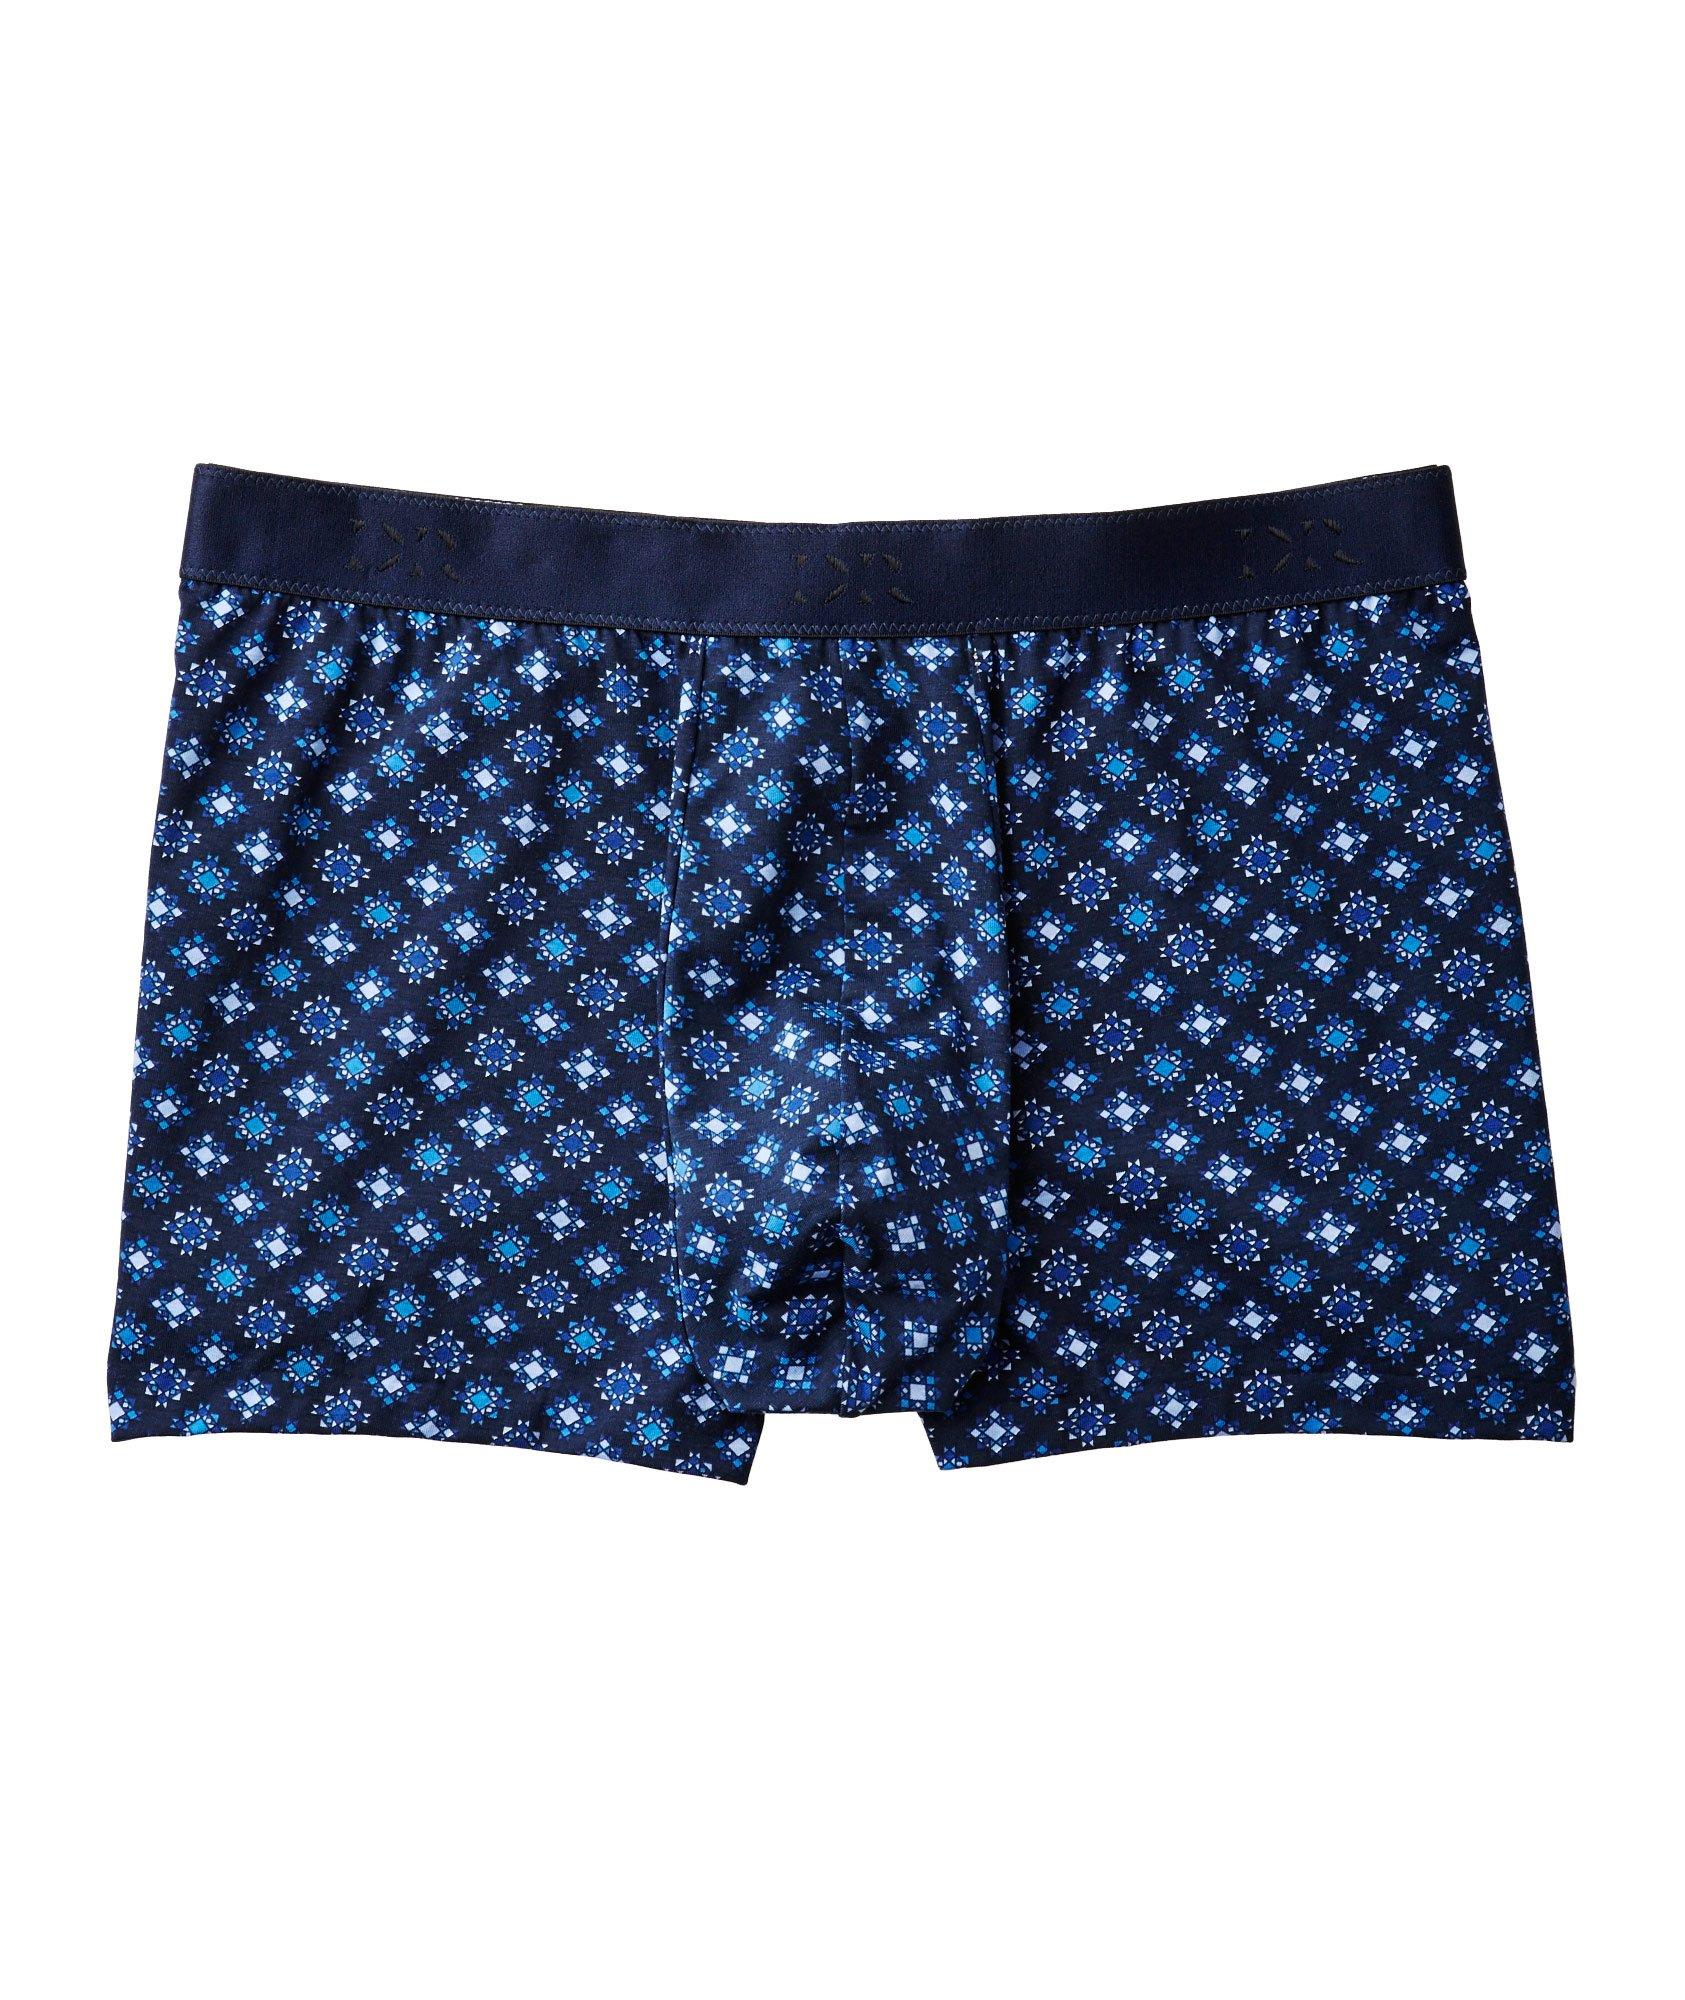 Closed Hipster Boxer Brief image 0